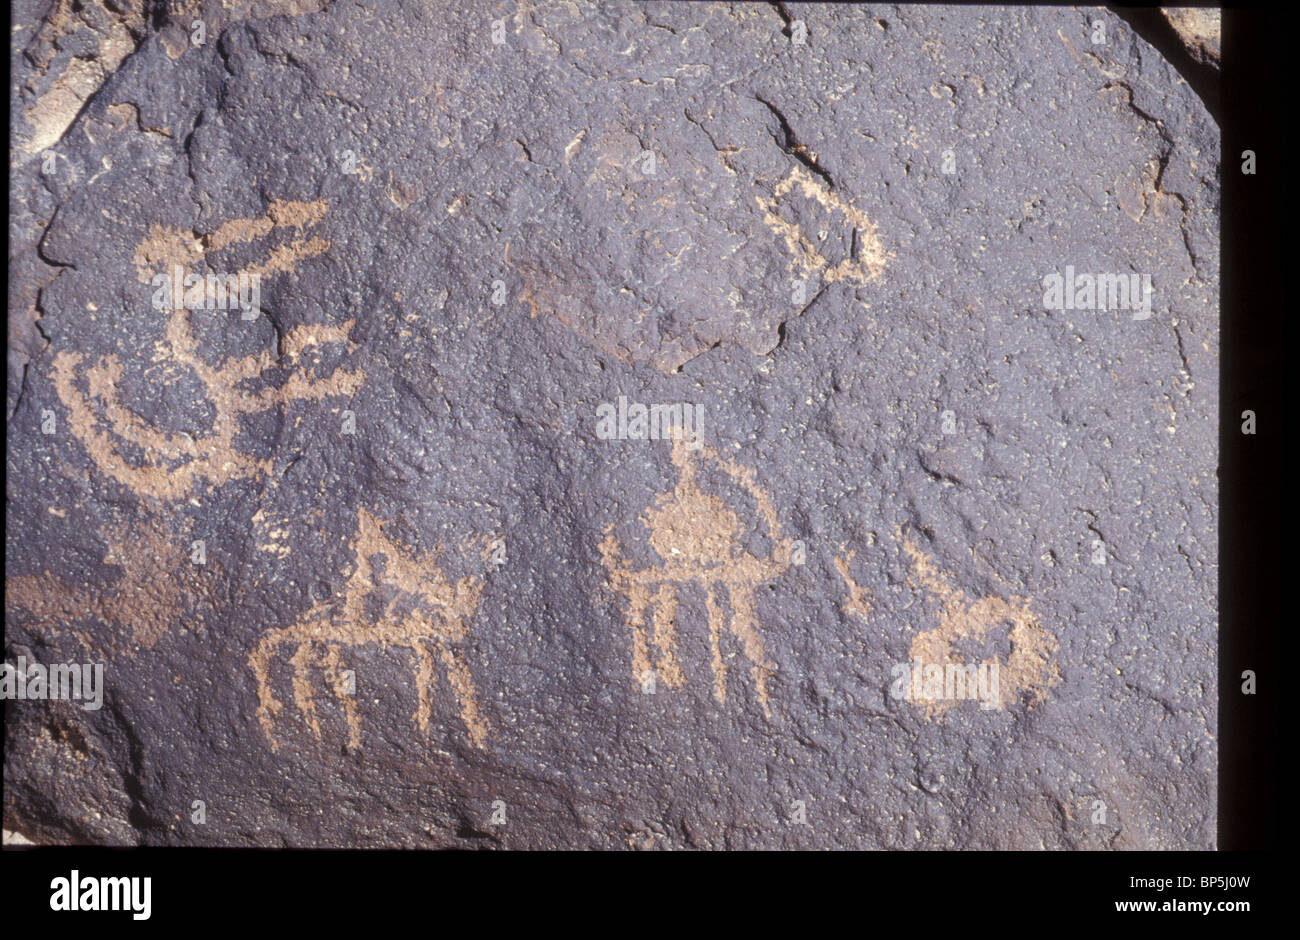 3462. MT. CARCOM, ROCK DRAWINGS DEPICTING LOCAL ANIMALS AND HUNTING SCENES Stock Photo